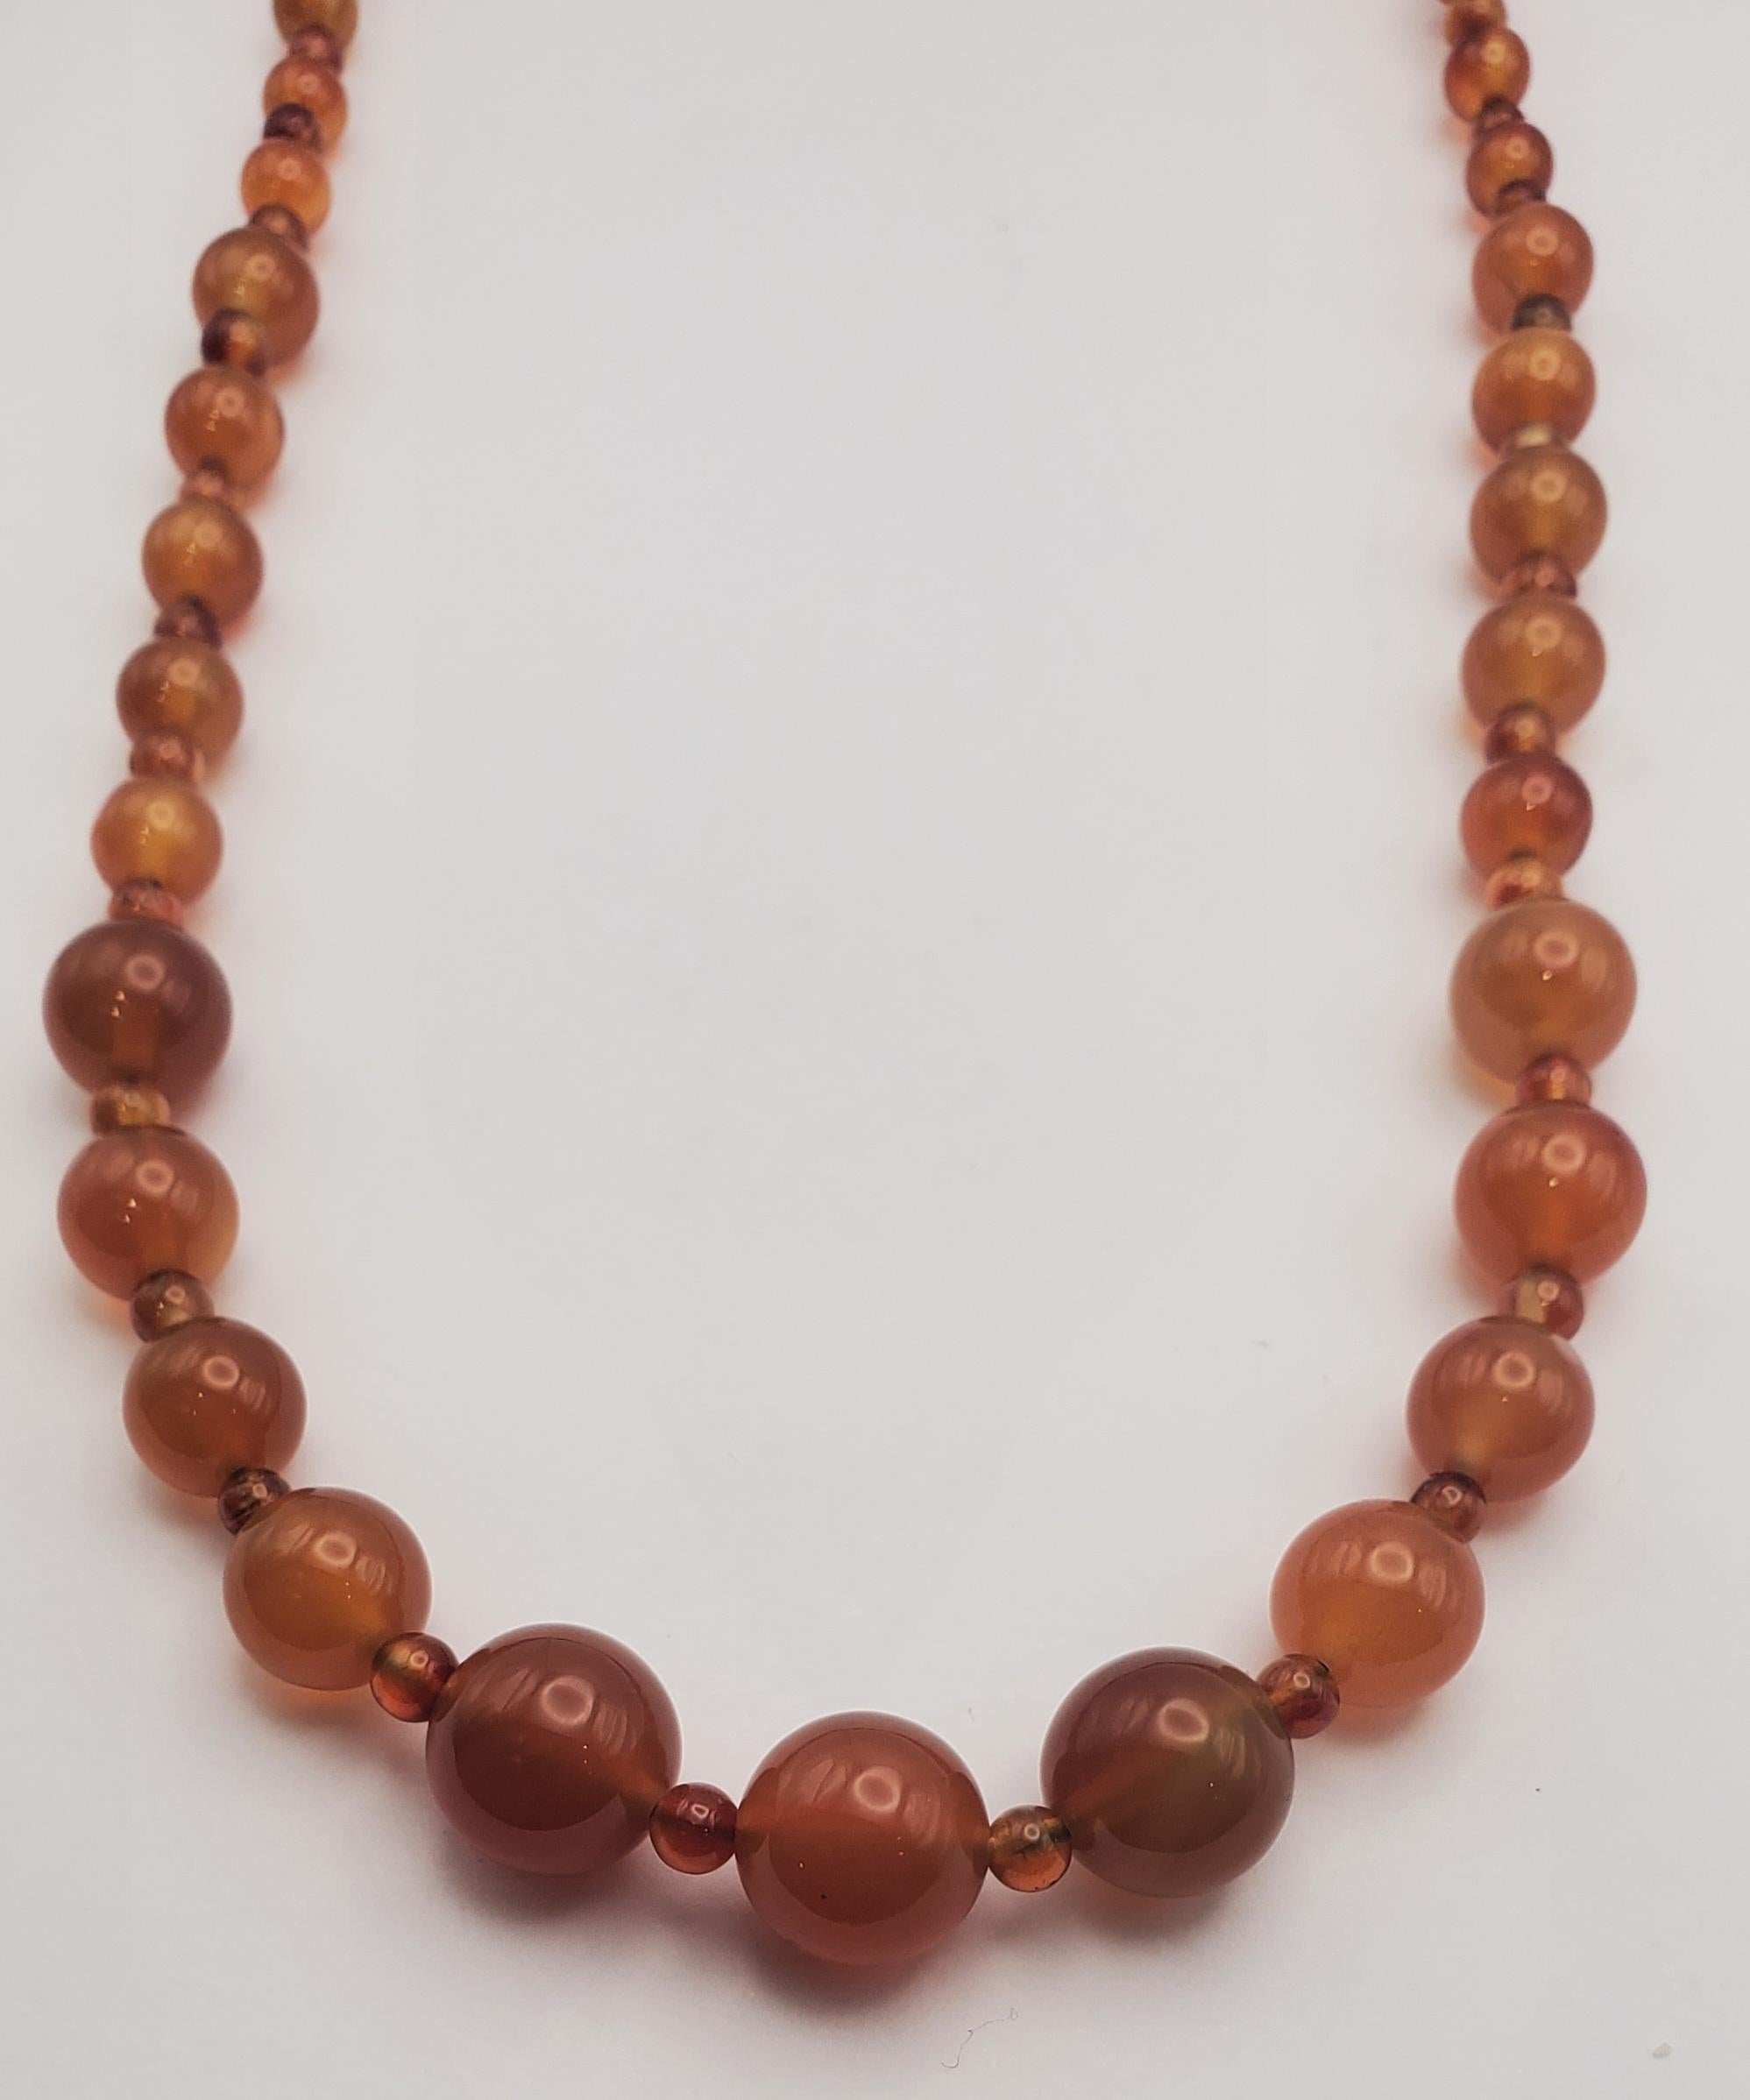 Gorgeous Vintage Adjustable Natural Carnelian Round Bead Necklace In Good Condition For Sale In Pittsburgh, PA